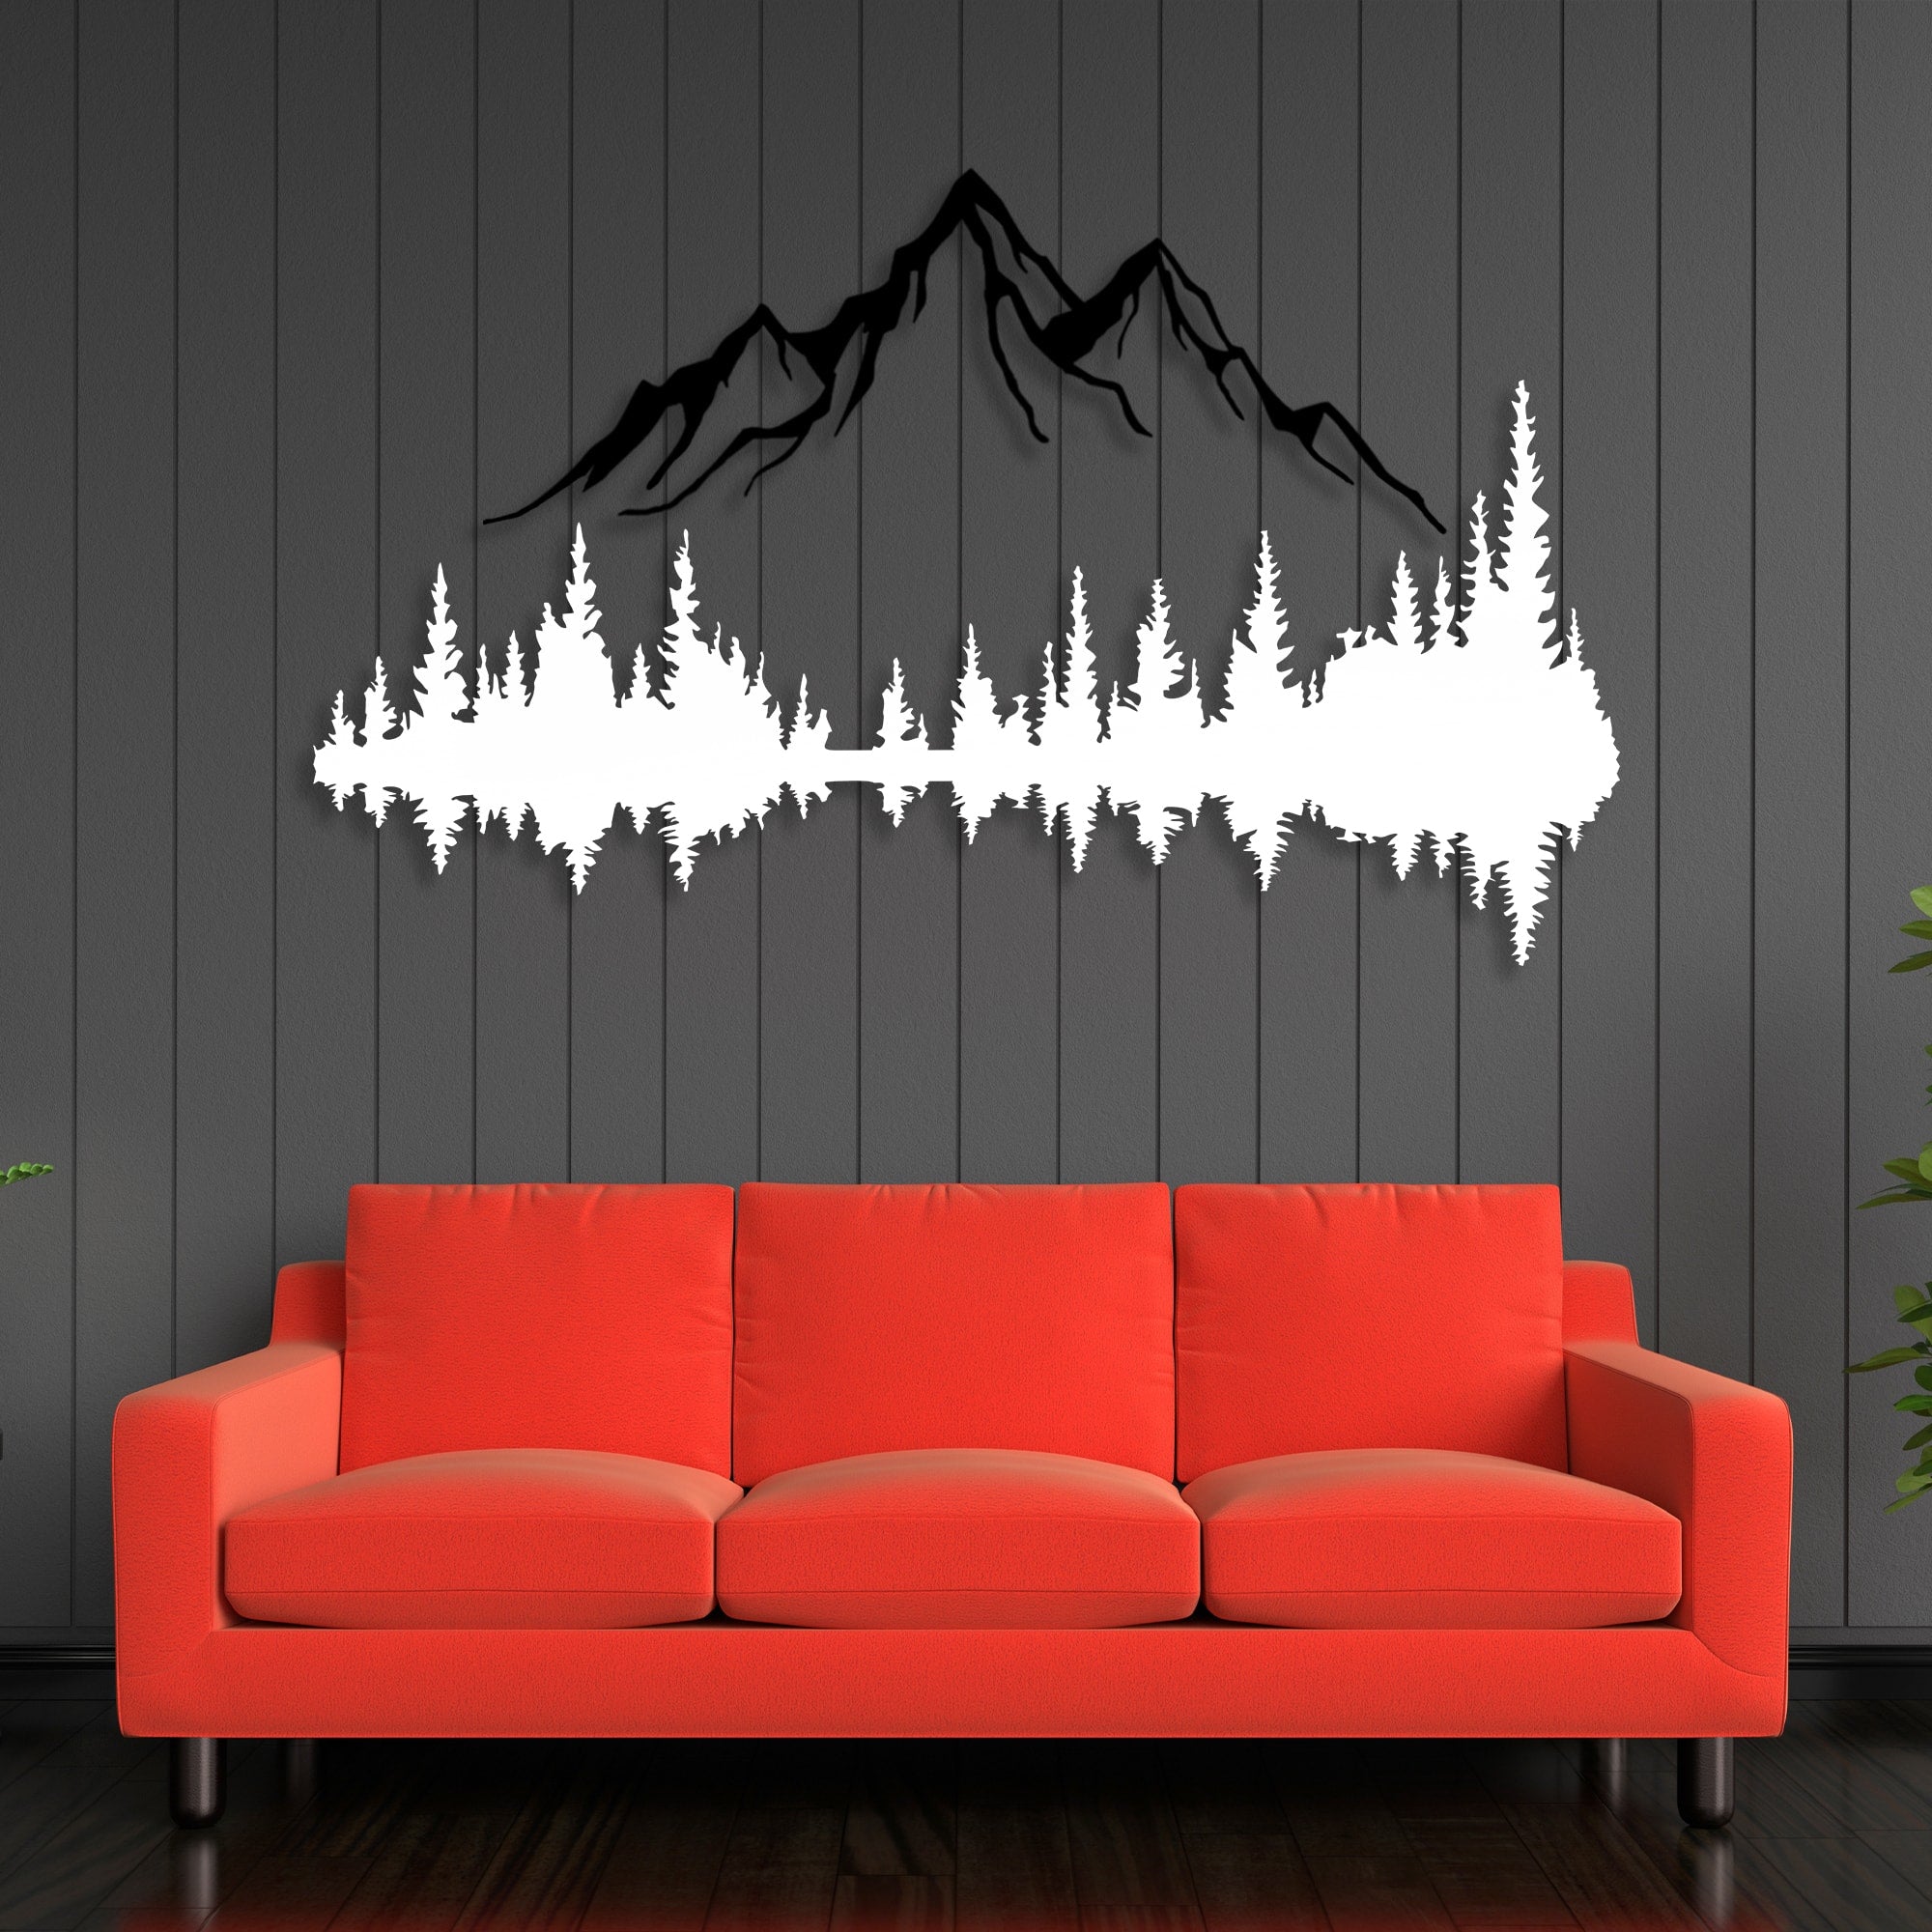 mountain and forest metal wall art red sofa